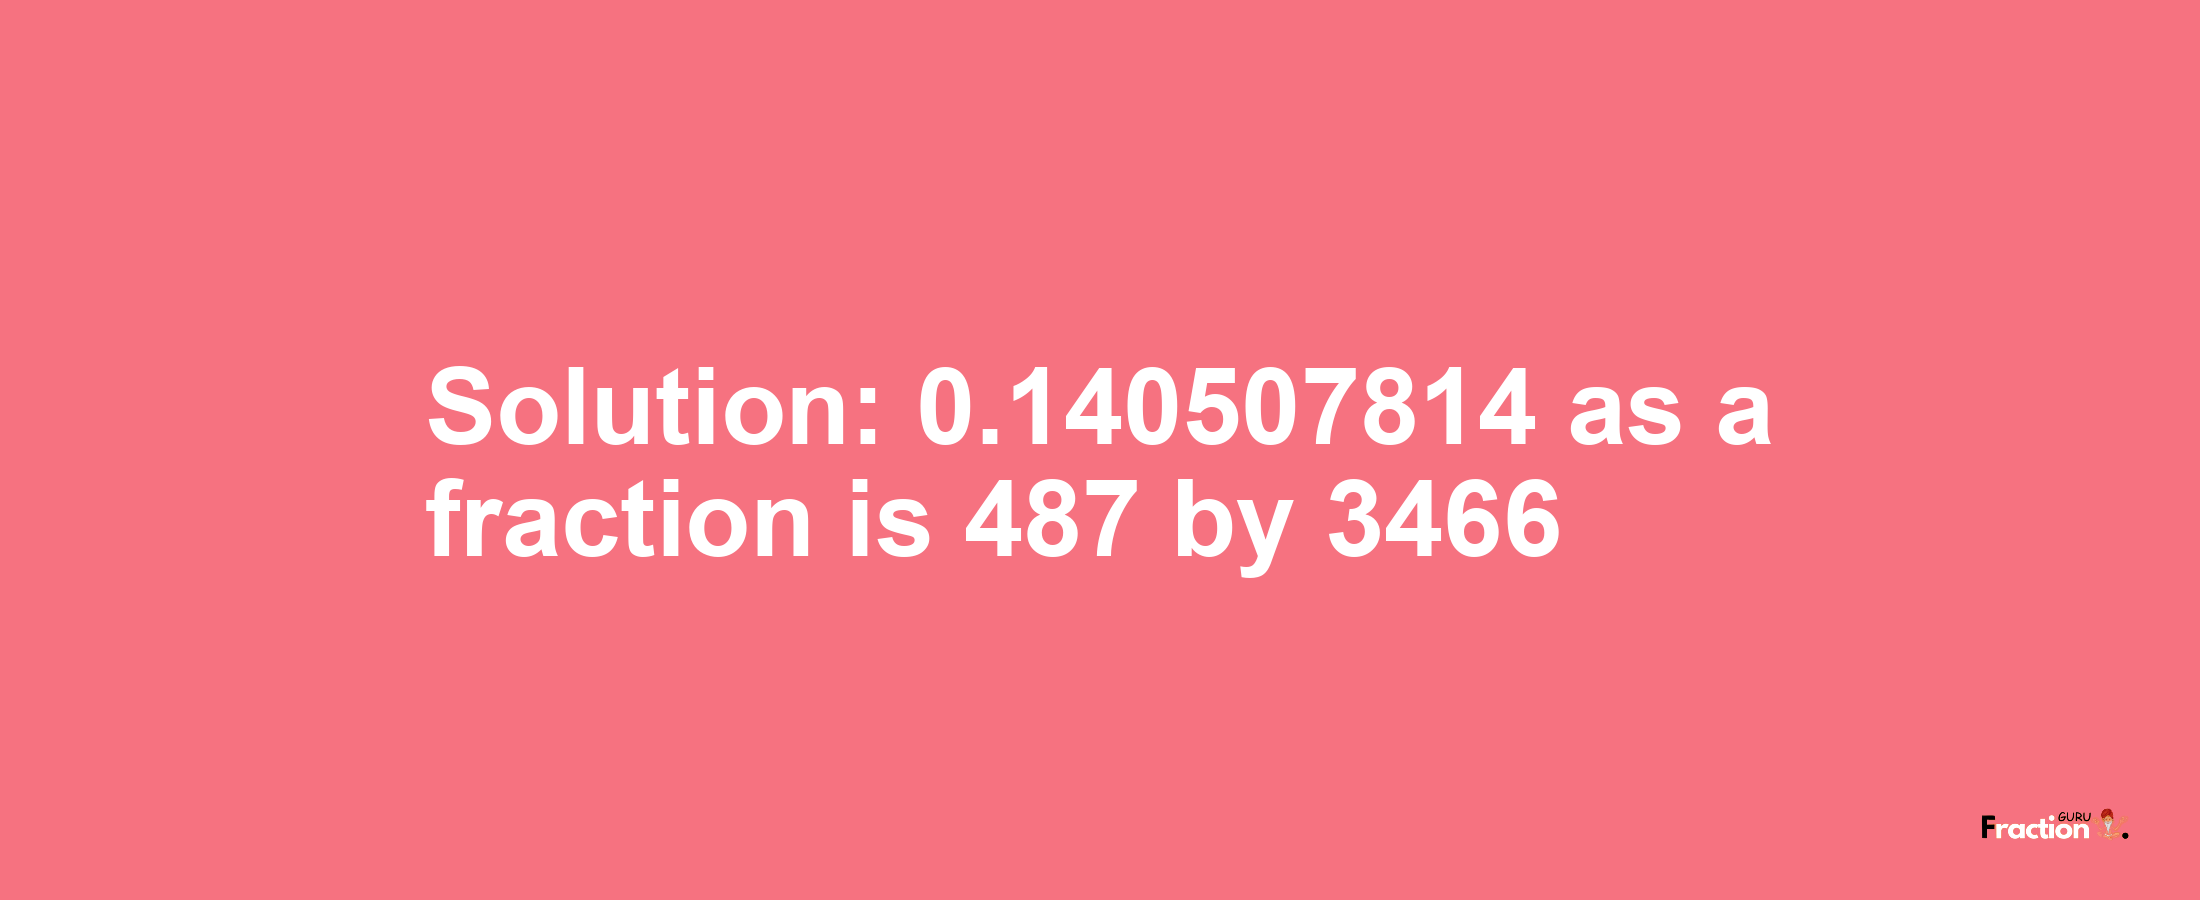 Solution:0.140507814 as a fraction is 487/3466